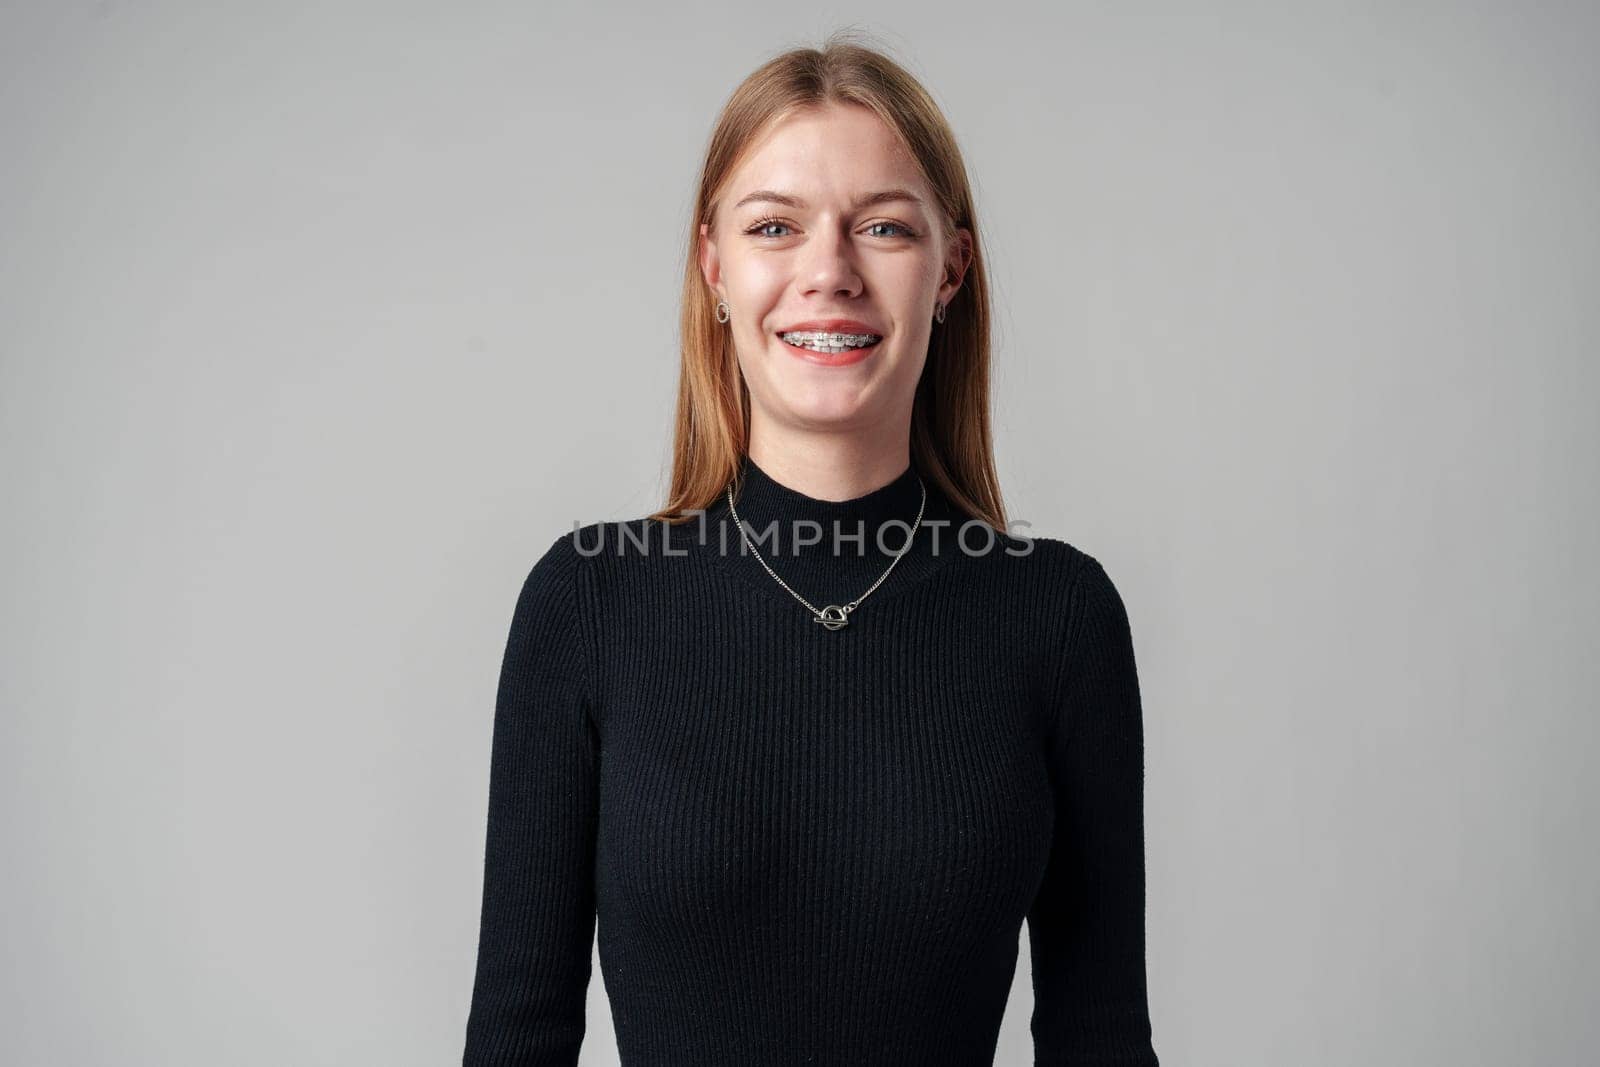 Smiling Woman in Black Top against gray background by Fabrikasimf